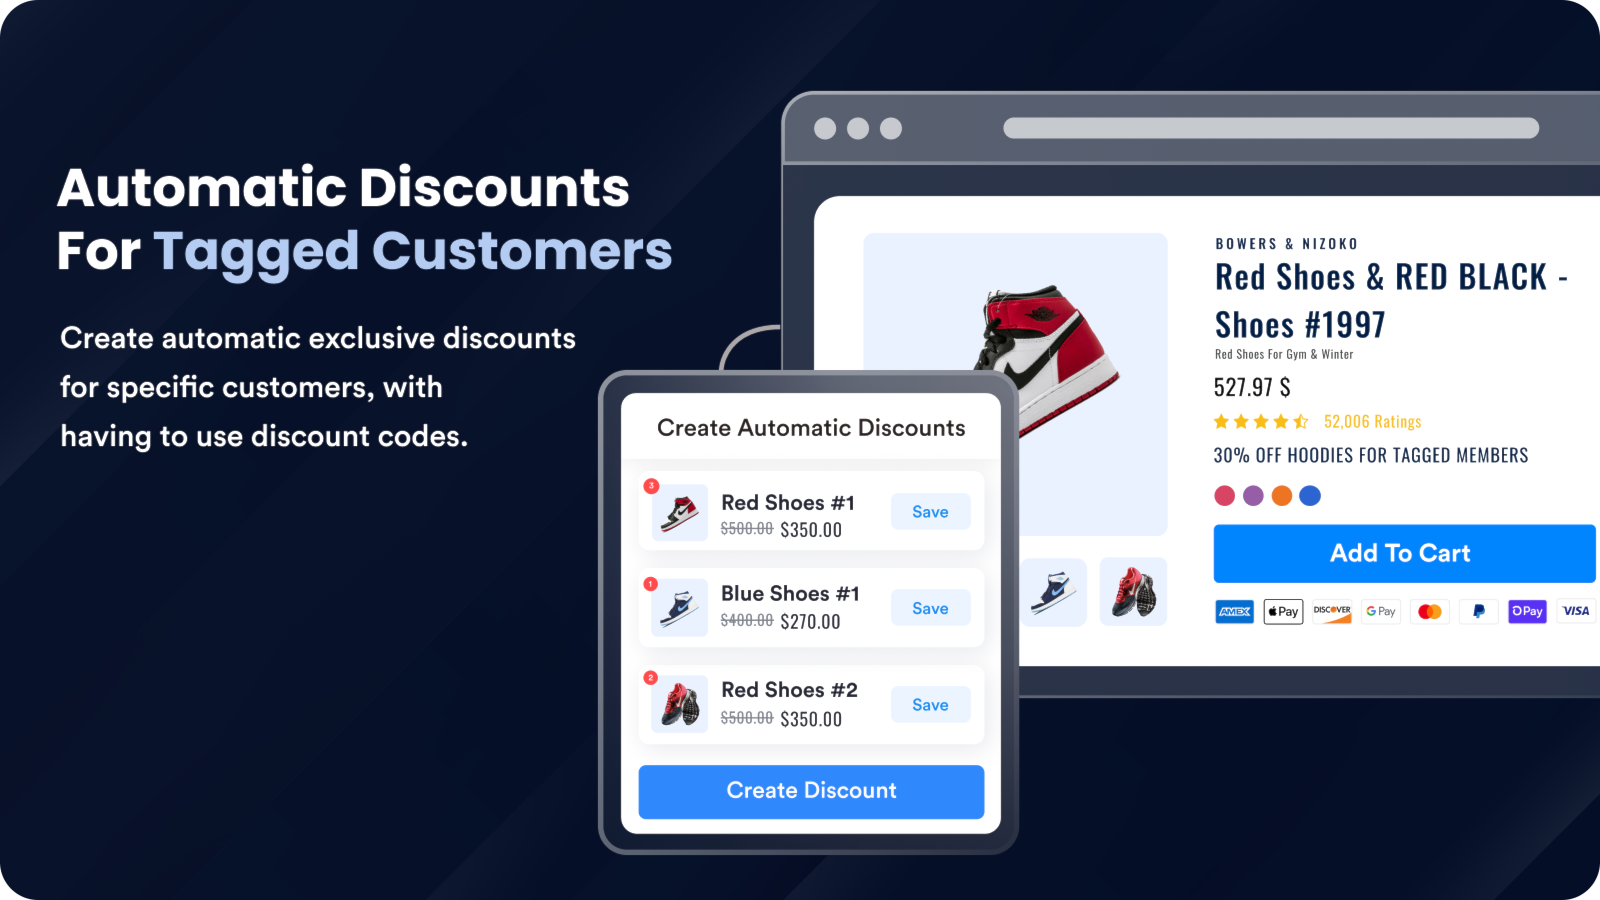 Automatic Discounts for Tagged Customers. No Discount Codes.